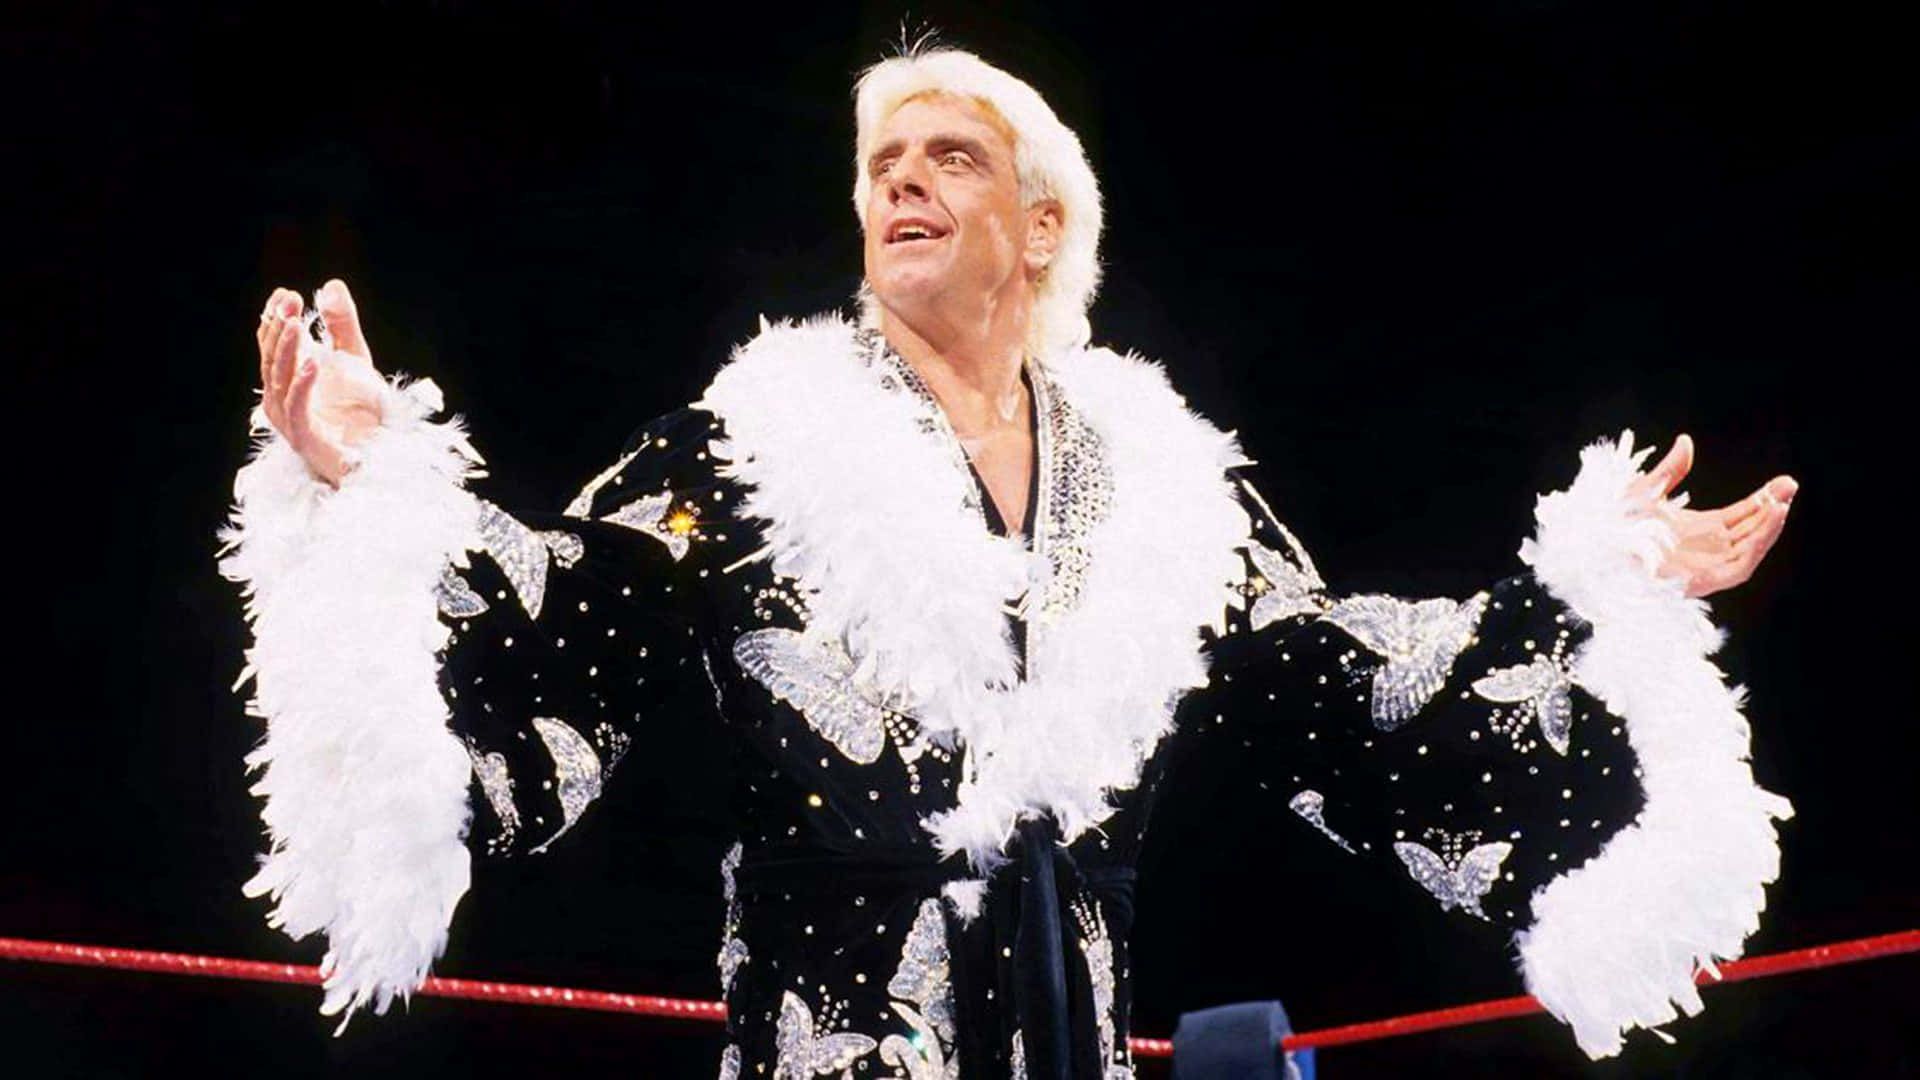 Ric Flair Wearing Black Robe With White Fur